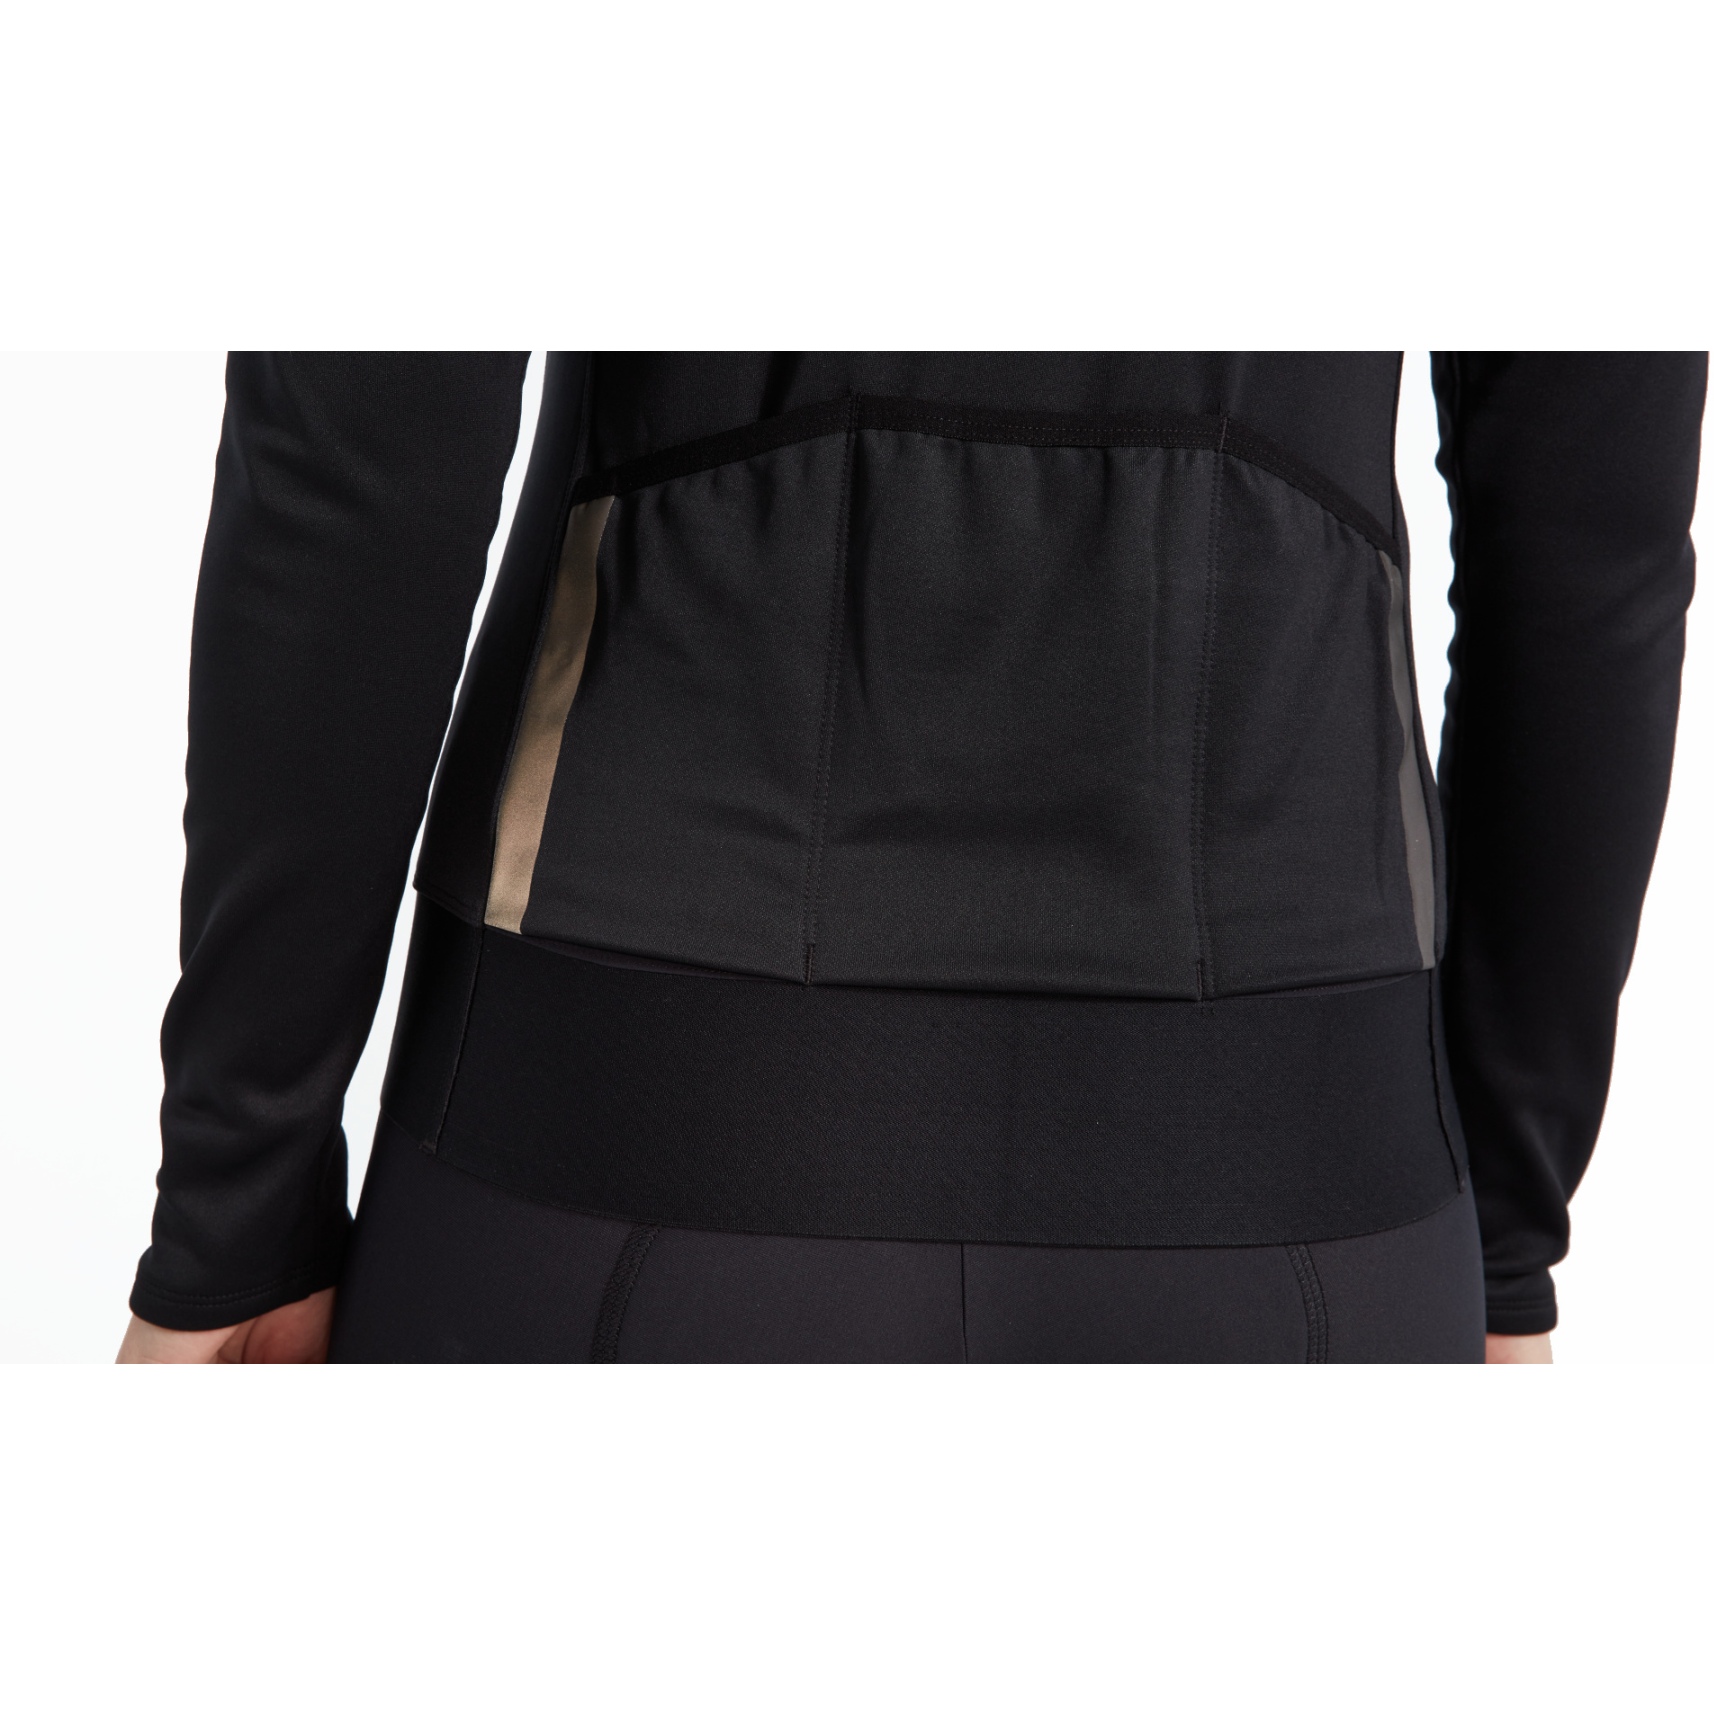 Specialized RBX Expert Thermal Long Sleeve Jersey Women - black